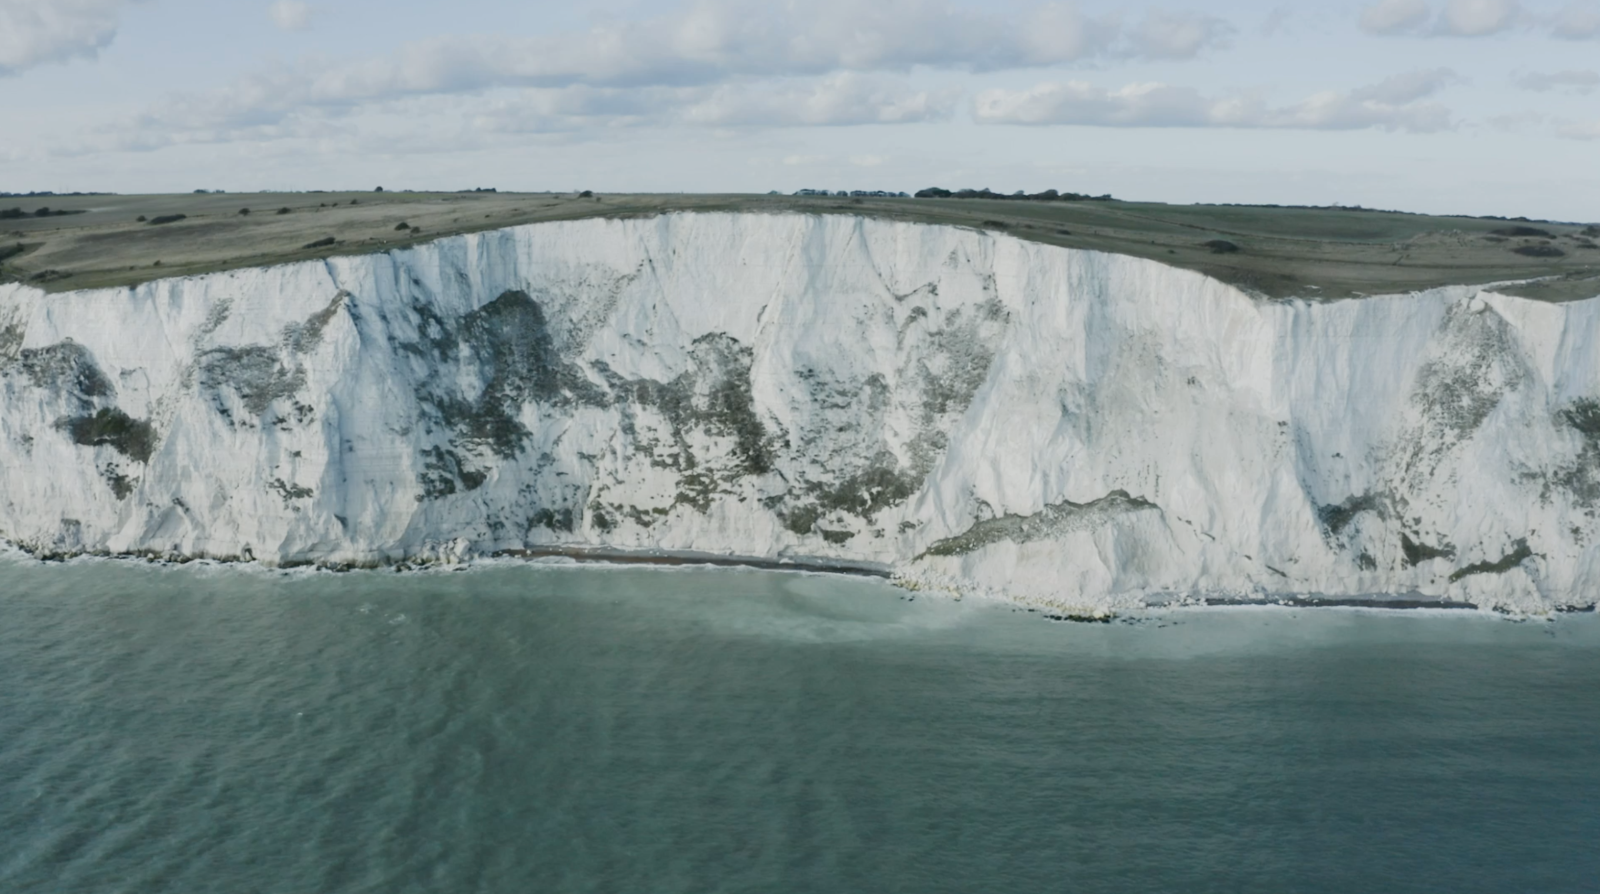 The white cliffs of Dover captured by drone over the English Channel by filmmaking team 93ft Sheffield for Beegrip advanced surface coating